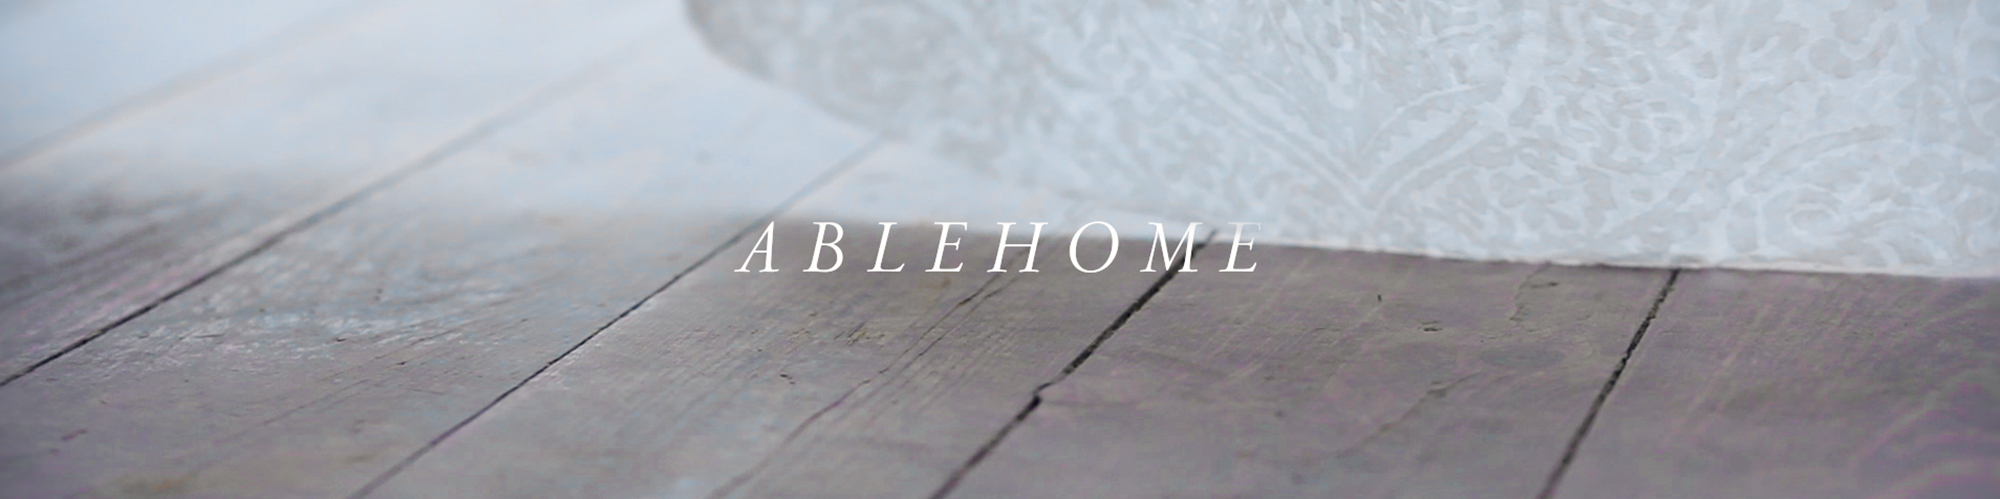 Musikvideo "Ablehome"